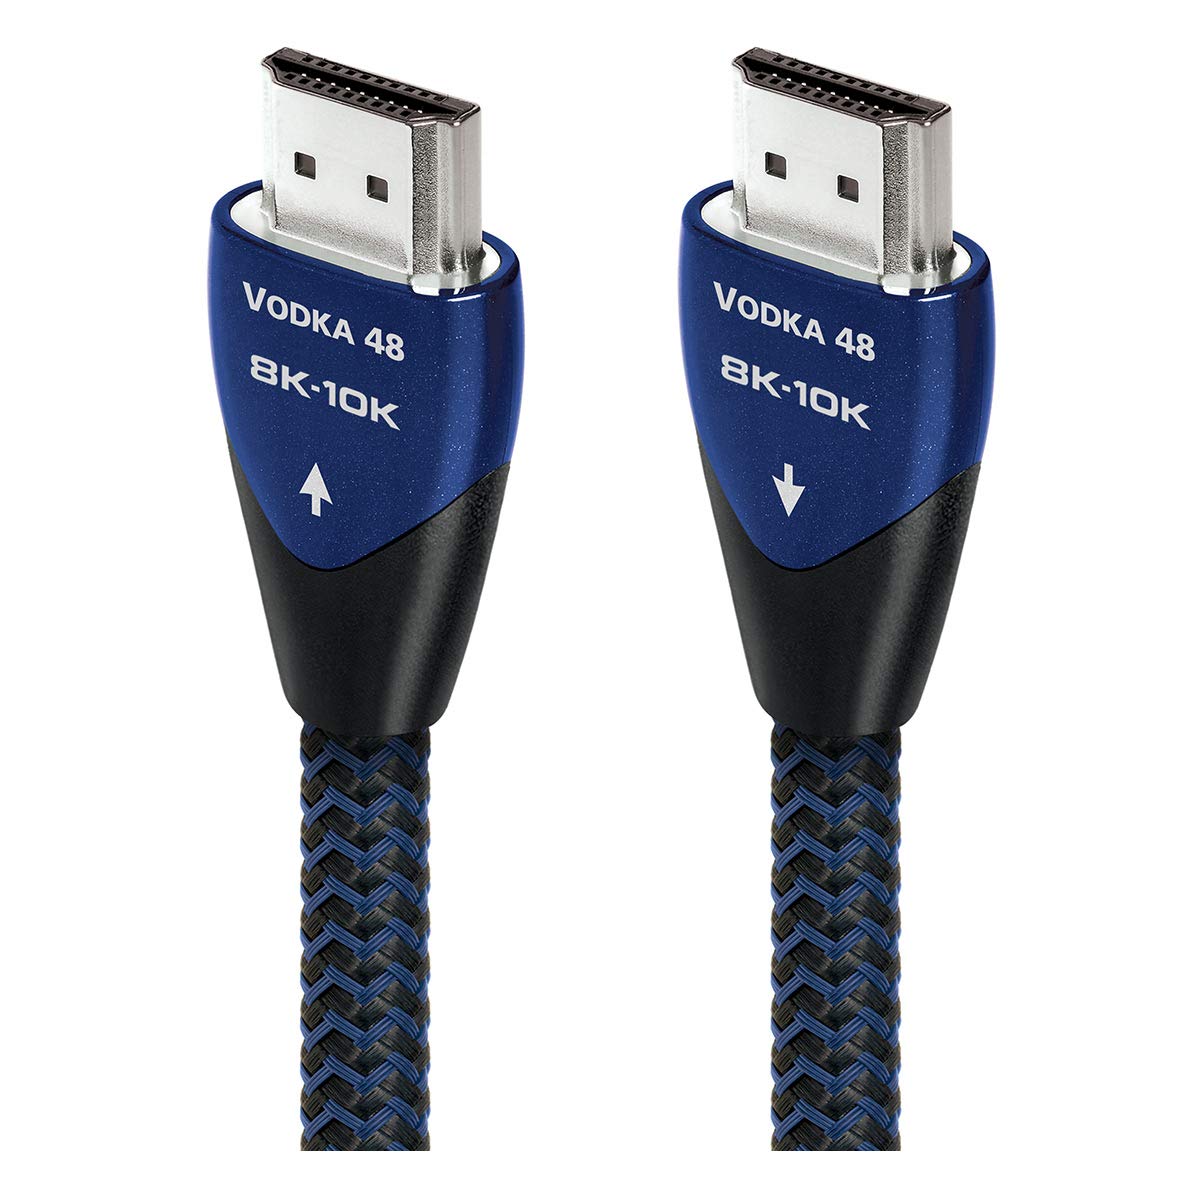 AudioQuest Vodka 48 8K-10K 48Gbps Cable HDMI